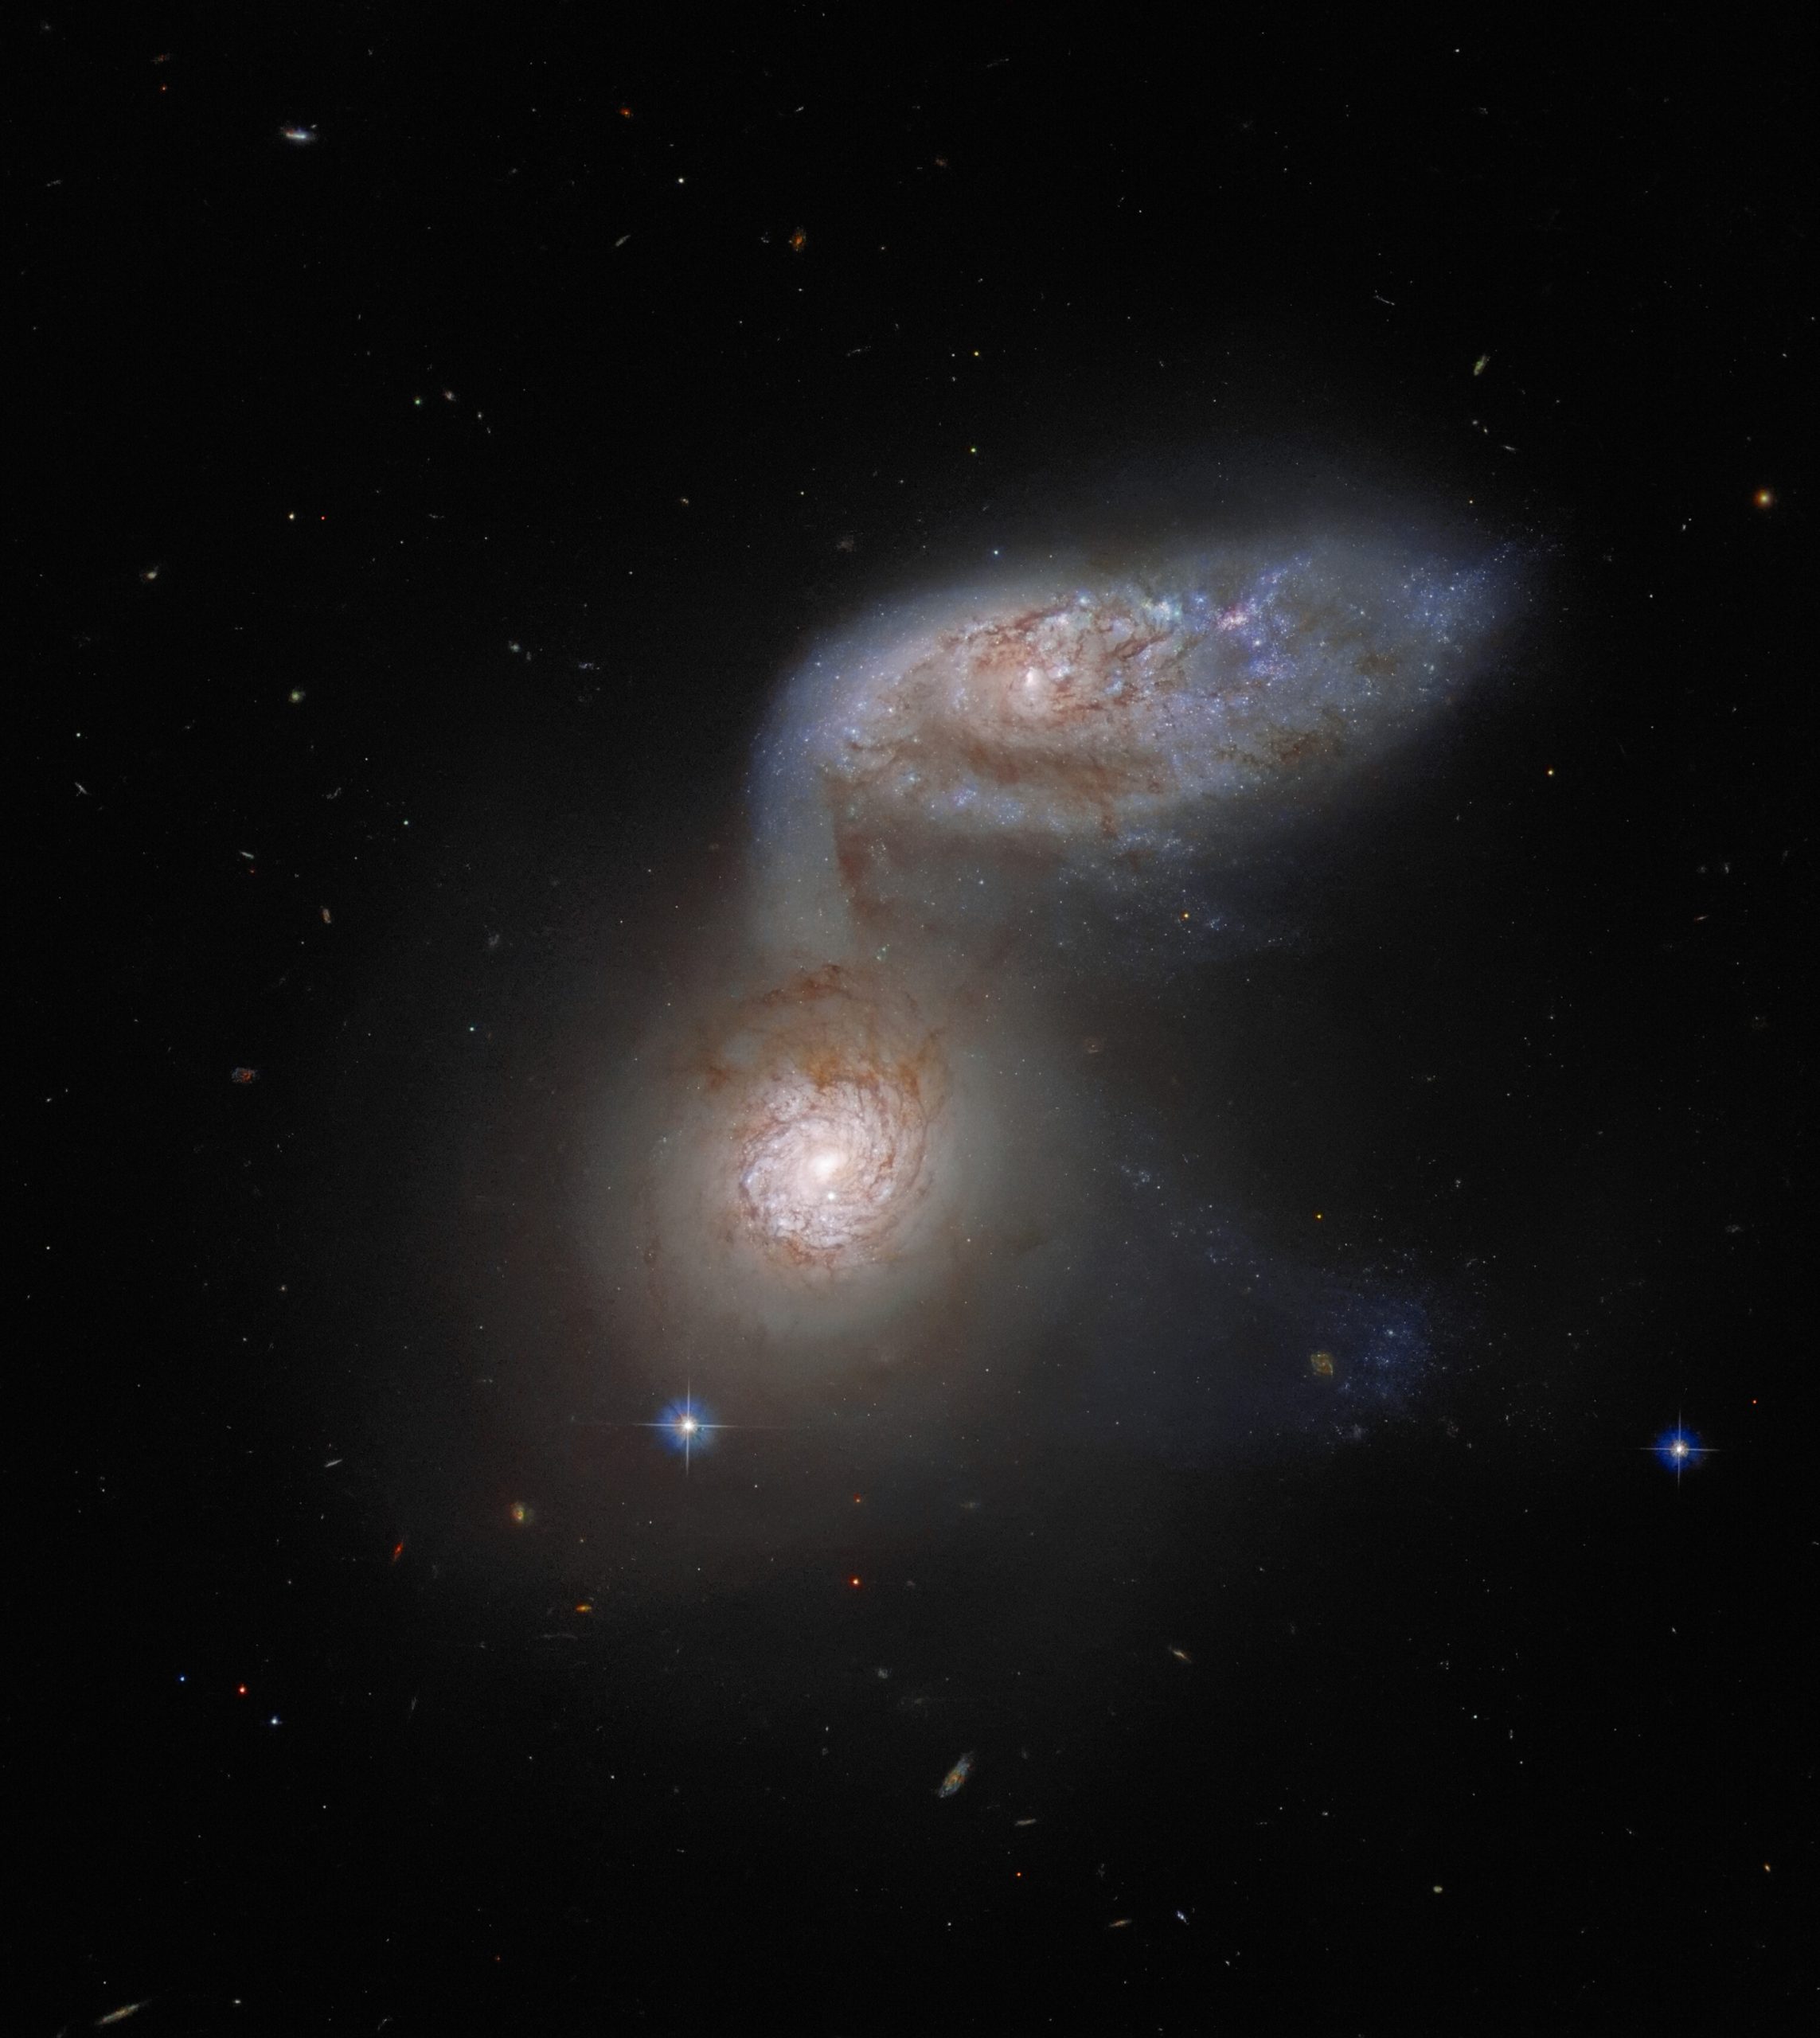 Another fascinating example of interacting galaxies in November's image - galaxies NGC 5953 and NGC 5954, collectively known as Apr 91. Credit: ESA/Hubble & NASA, J. Dalcanton